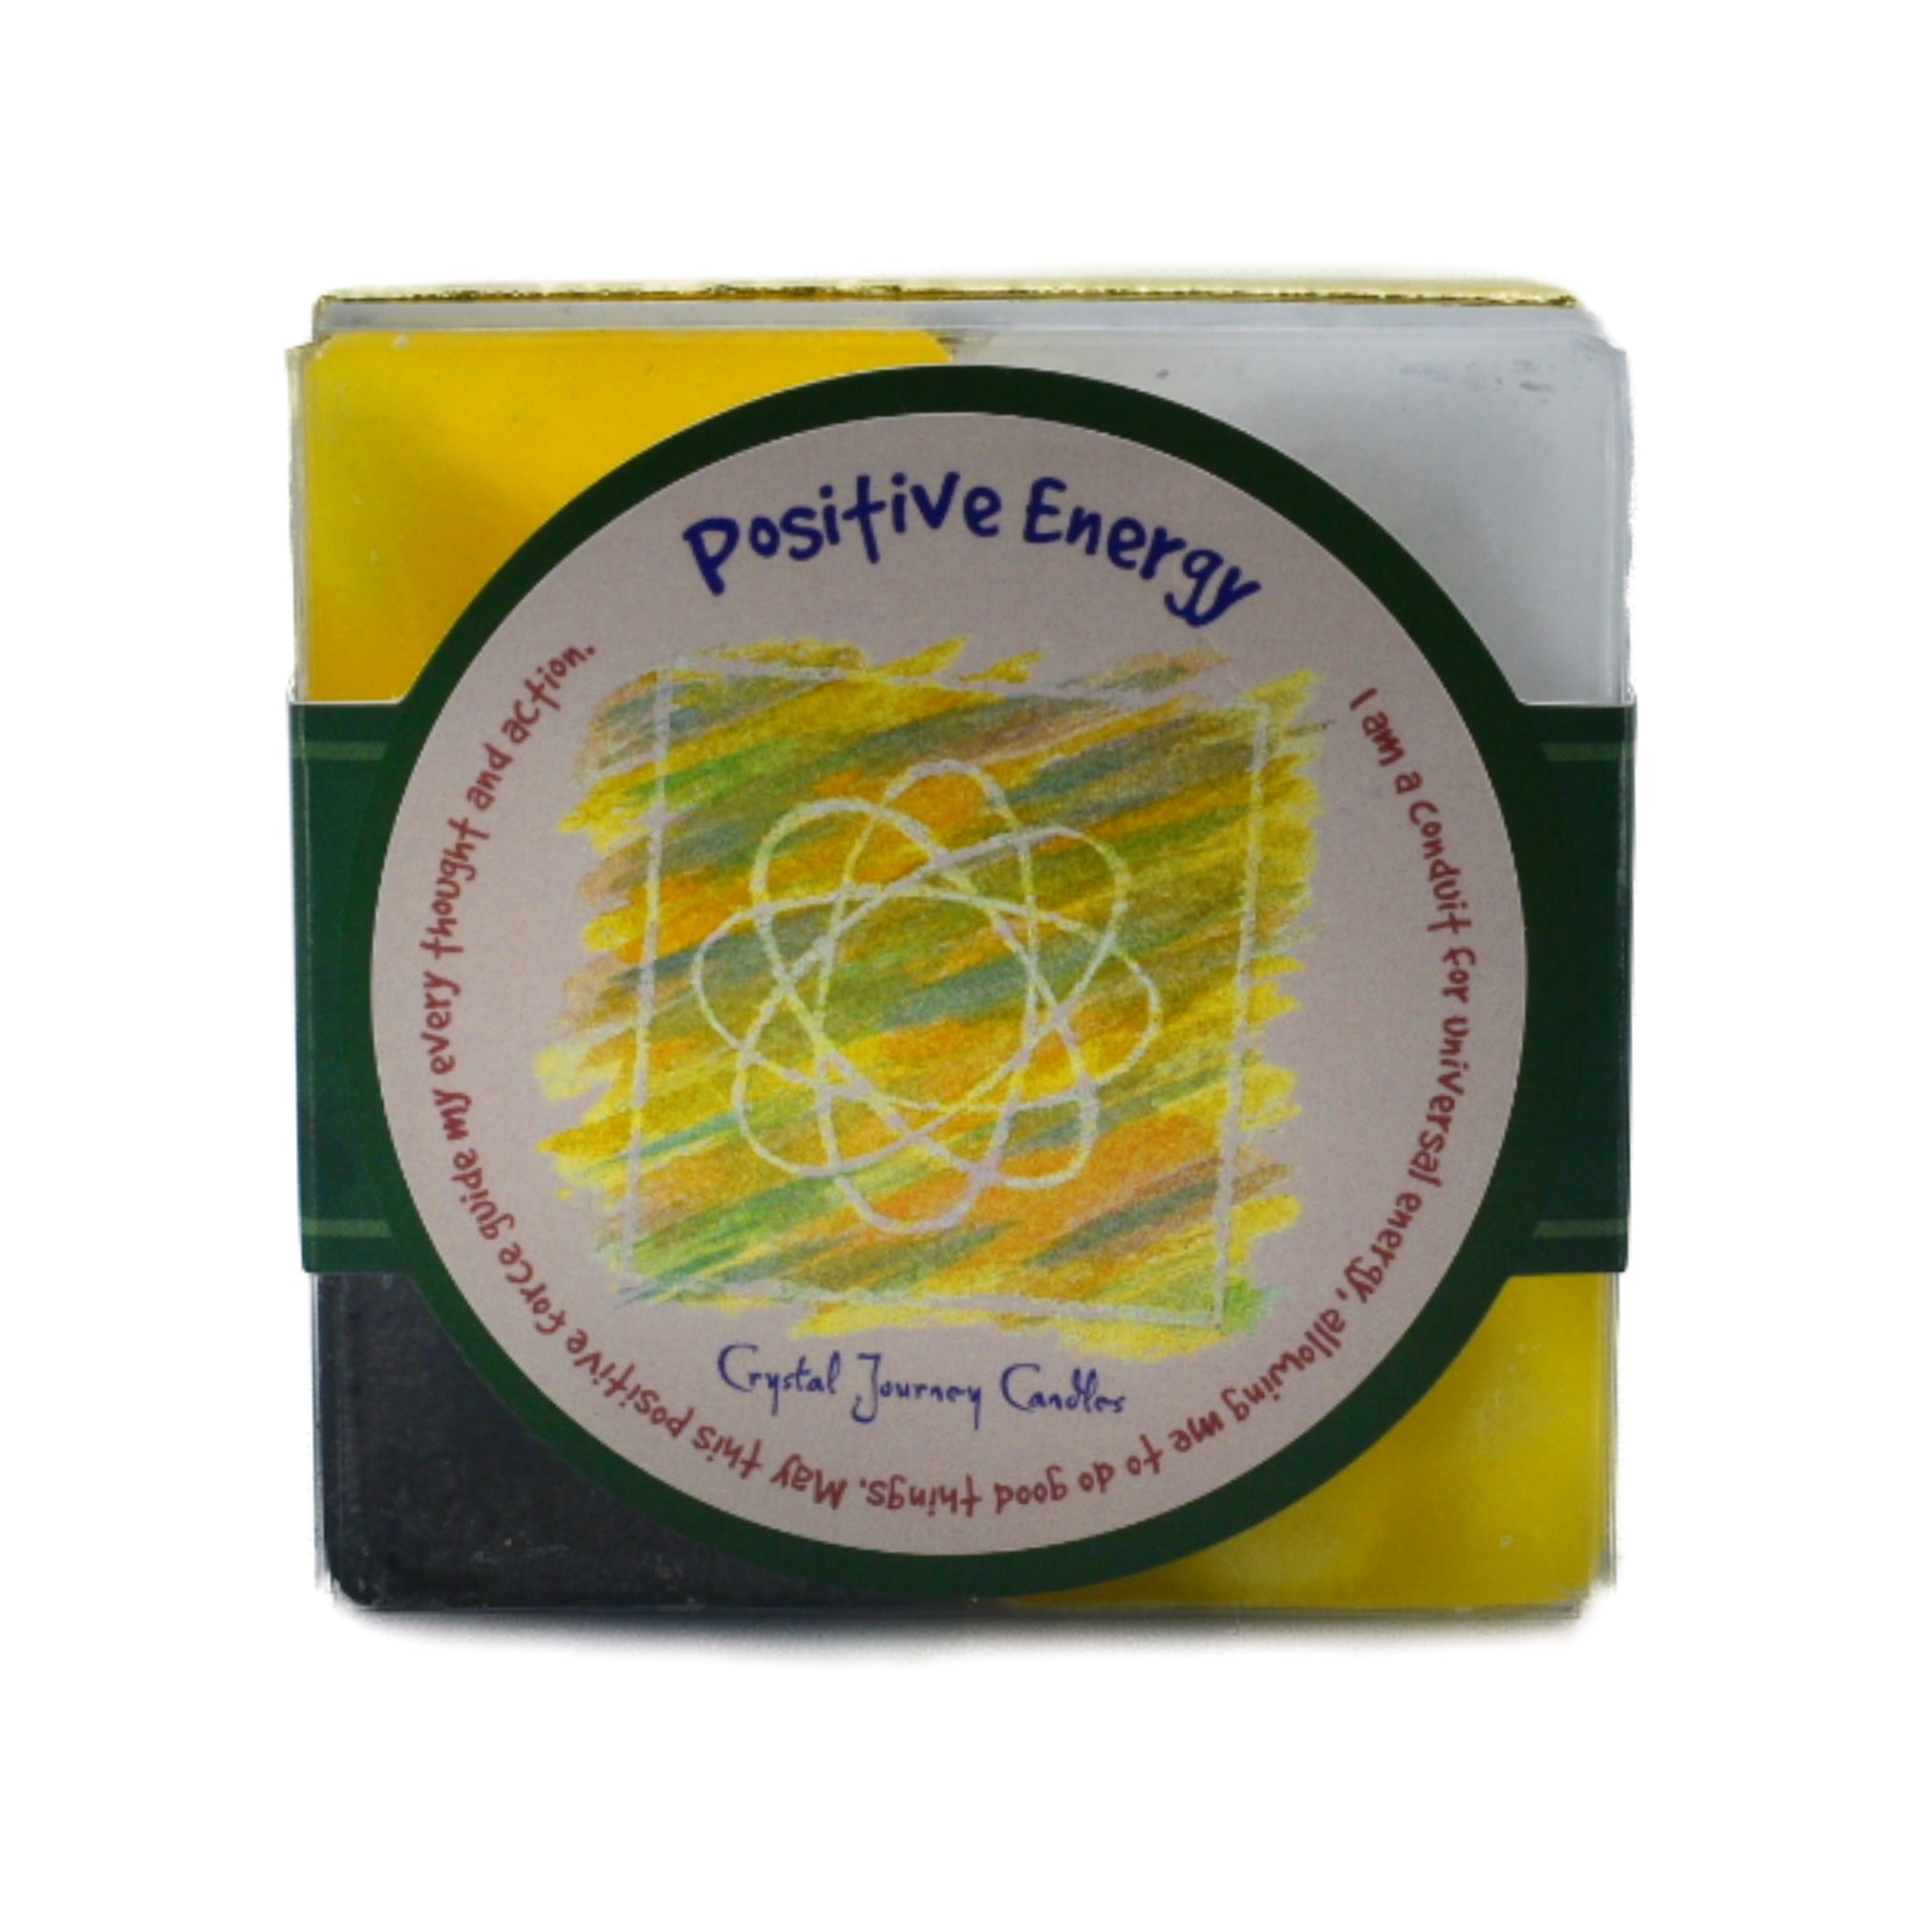 Positive Energy Square Pack Candle.  This pack has two yellow positive energy candles, one white spirit candle and one positive energy candle.  Each candle is scented with essential oils.